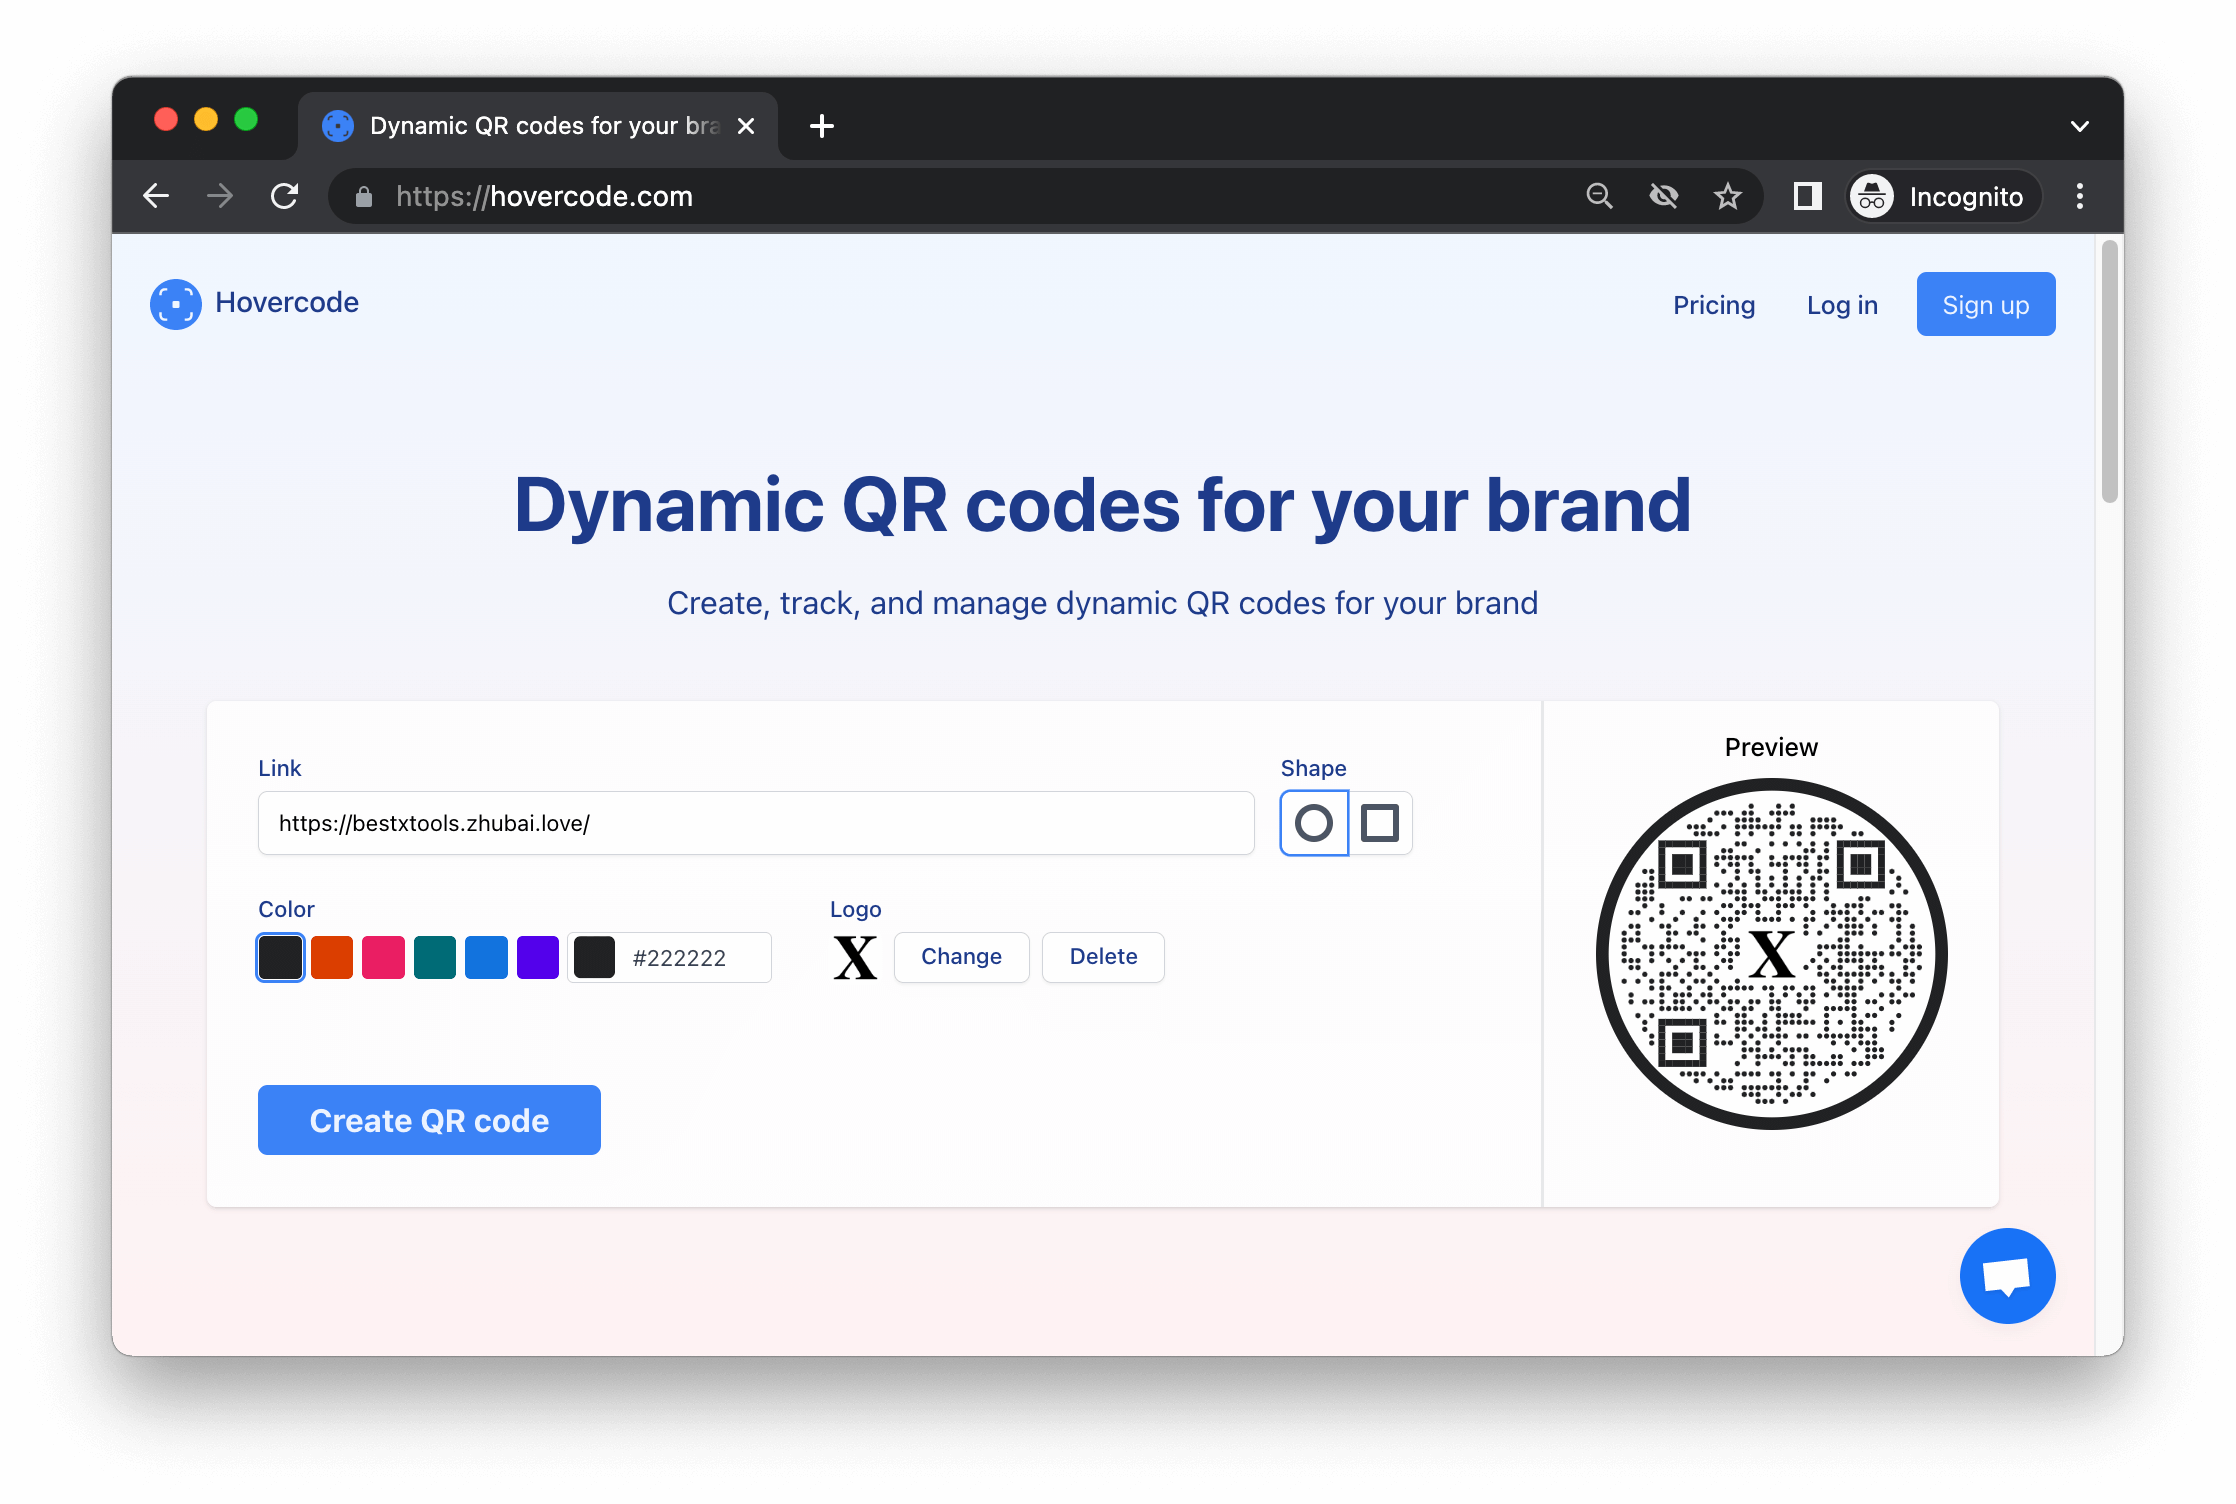 Hovercode - Dynamic QR codes for your brand